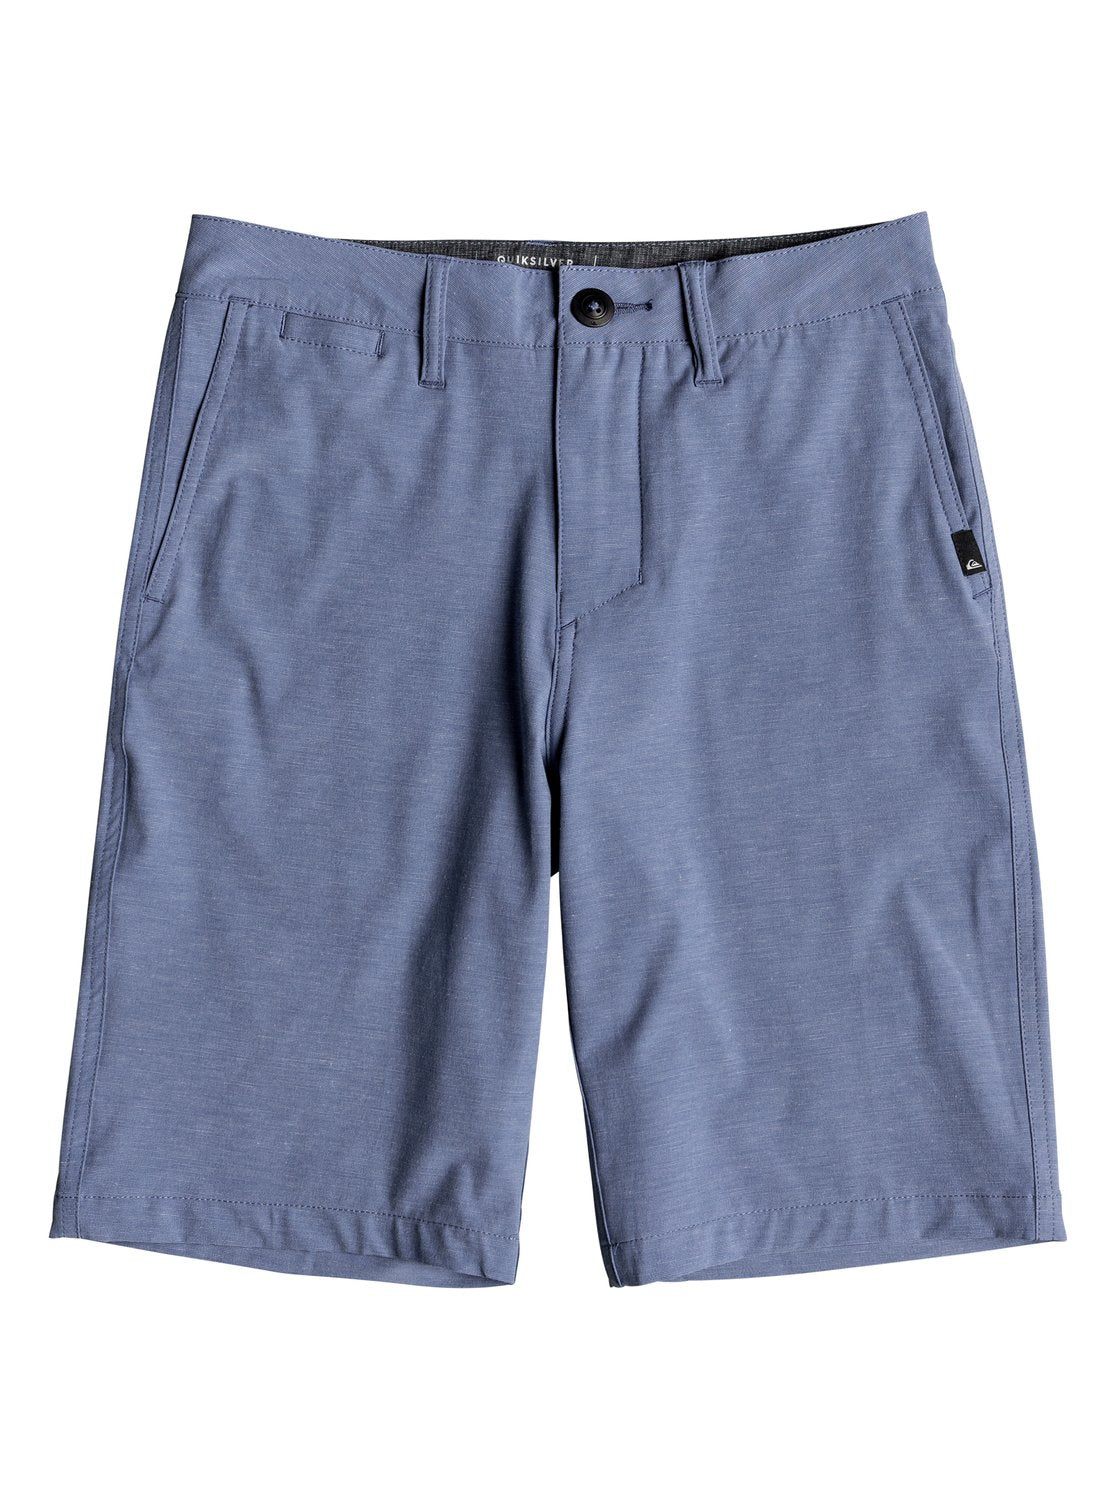 Quiksilver Union Heather 19in Youth Amphibian Shorts BNG0 24/8